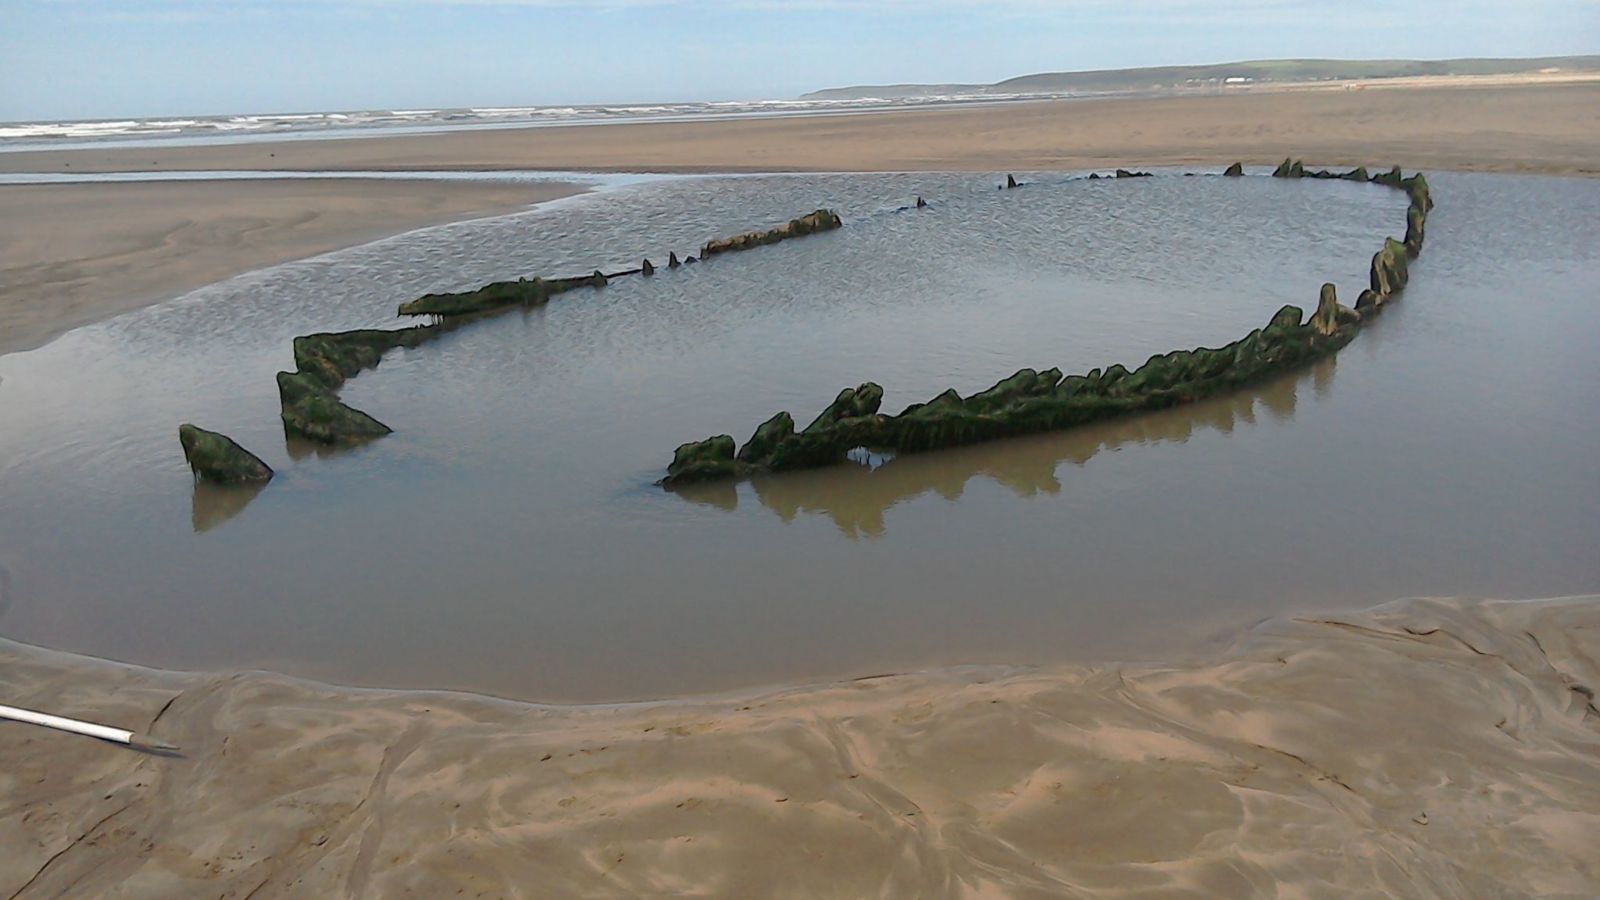 The newly protected Westward Ho! Wreck on Northam Burrows Sands. It is believed to be the remains of the 'Sally', which ran aground on the sands in 1769, while bound from Oporto in Portugal to Bristol with a cargo of port wine.